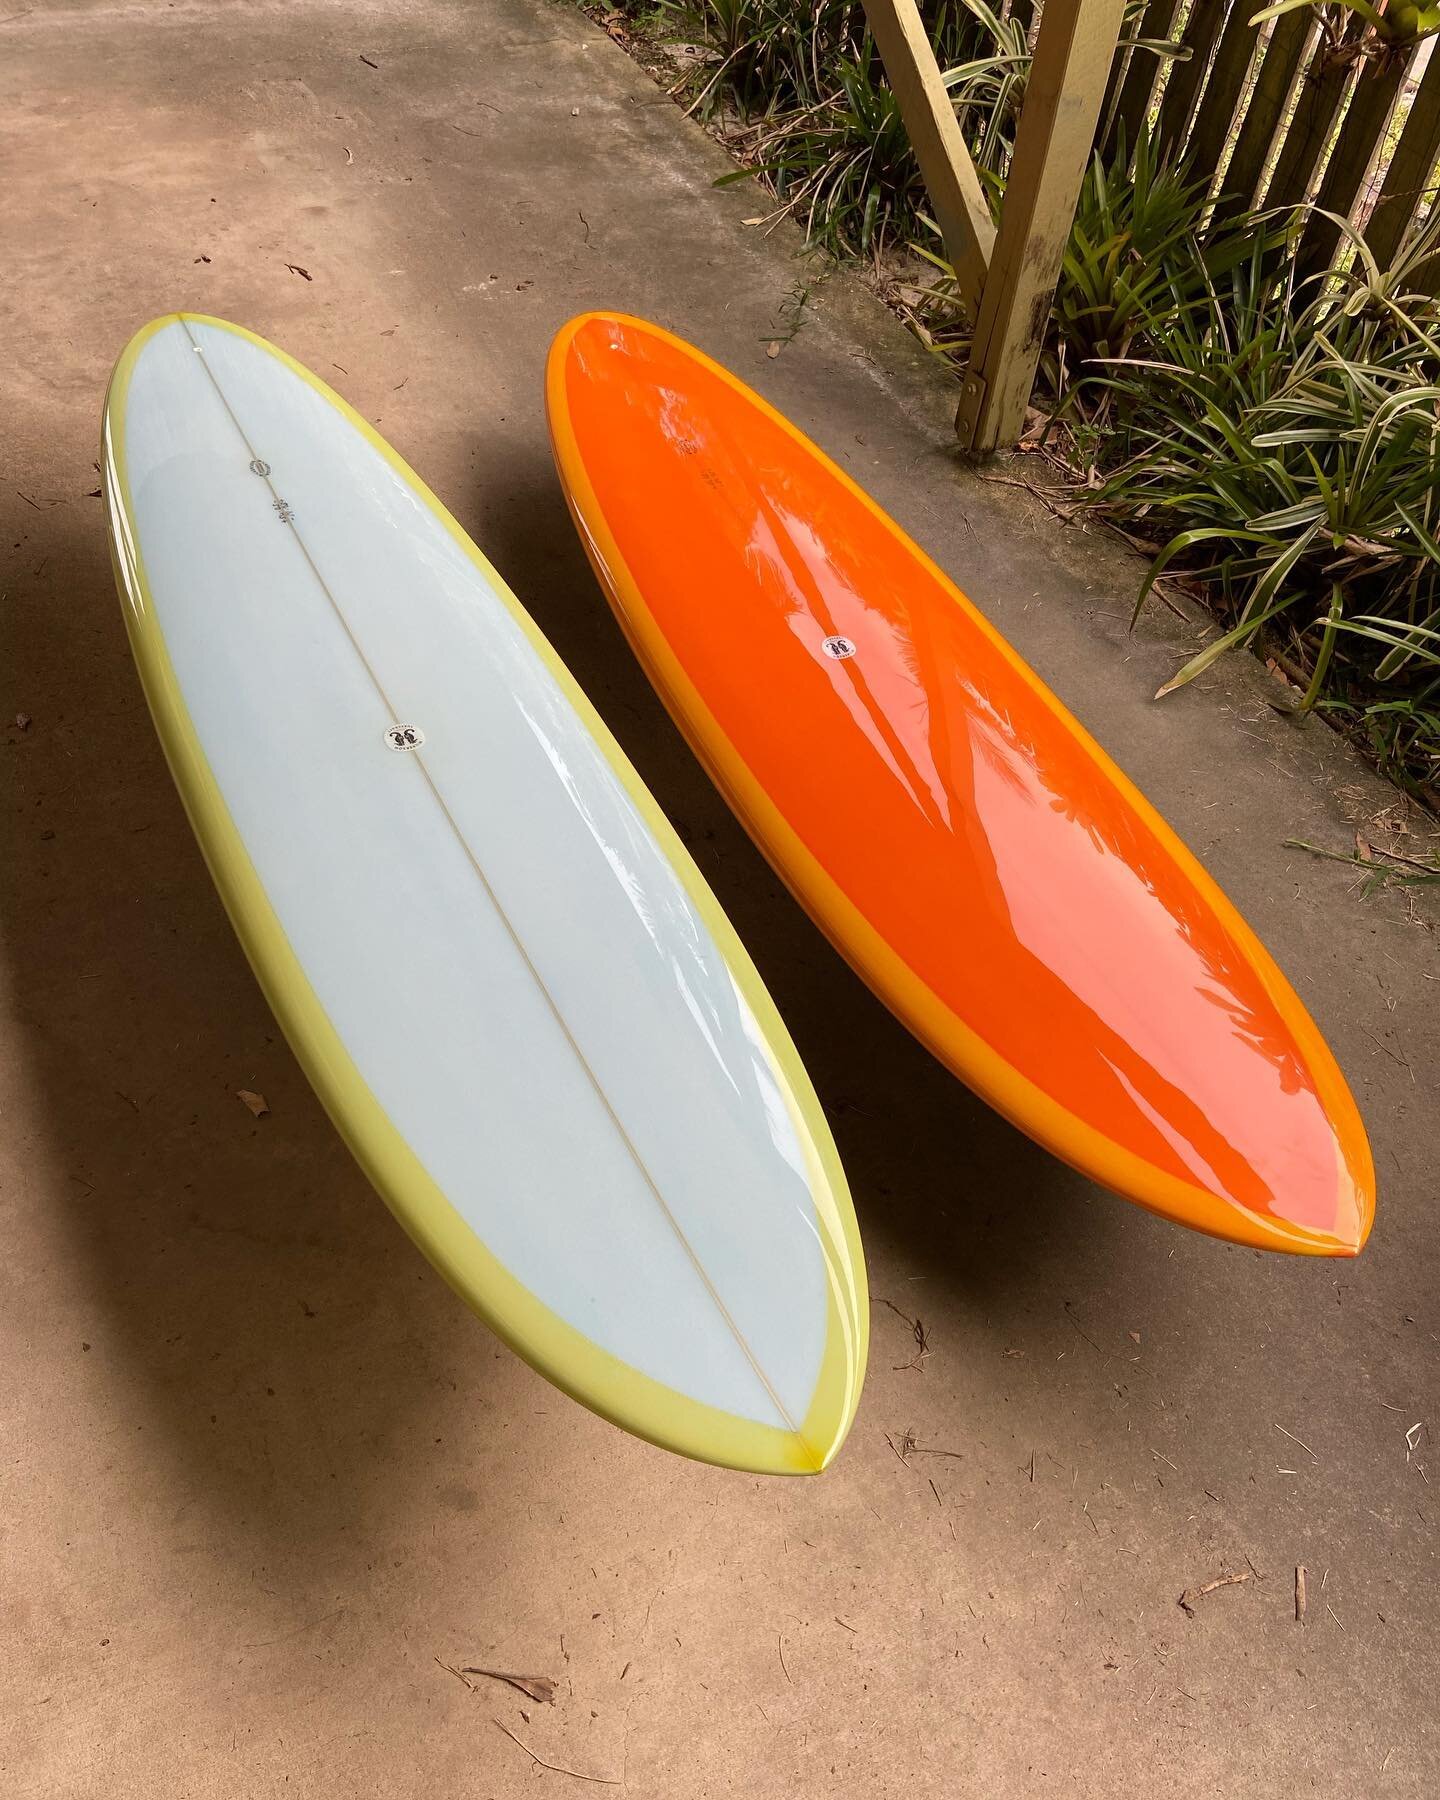 Introducing the Mid Deep Double/ MDsquared.  As most shapers journey we meet other shapers, Steve Griffo Griffith showed me what he had been making at his G&amp;S Australia days.  This design concept was for Robert K, griffo was retiring and he passe